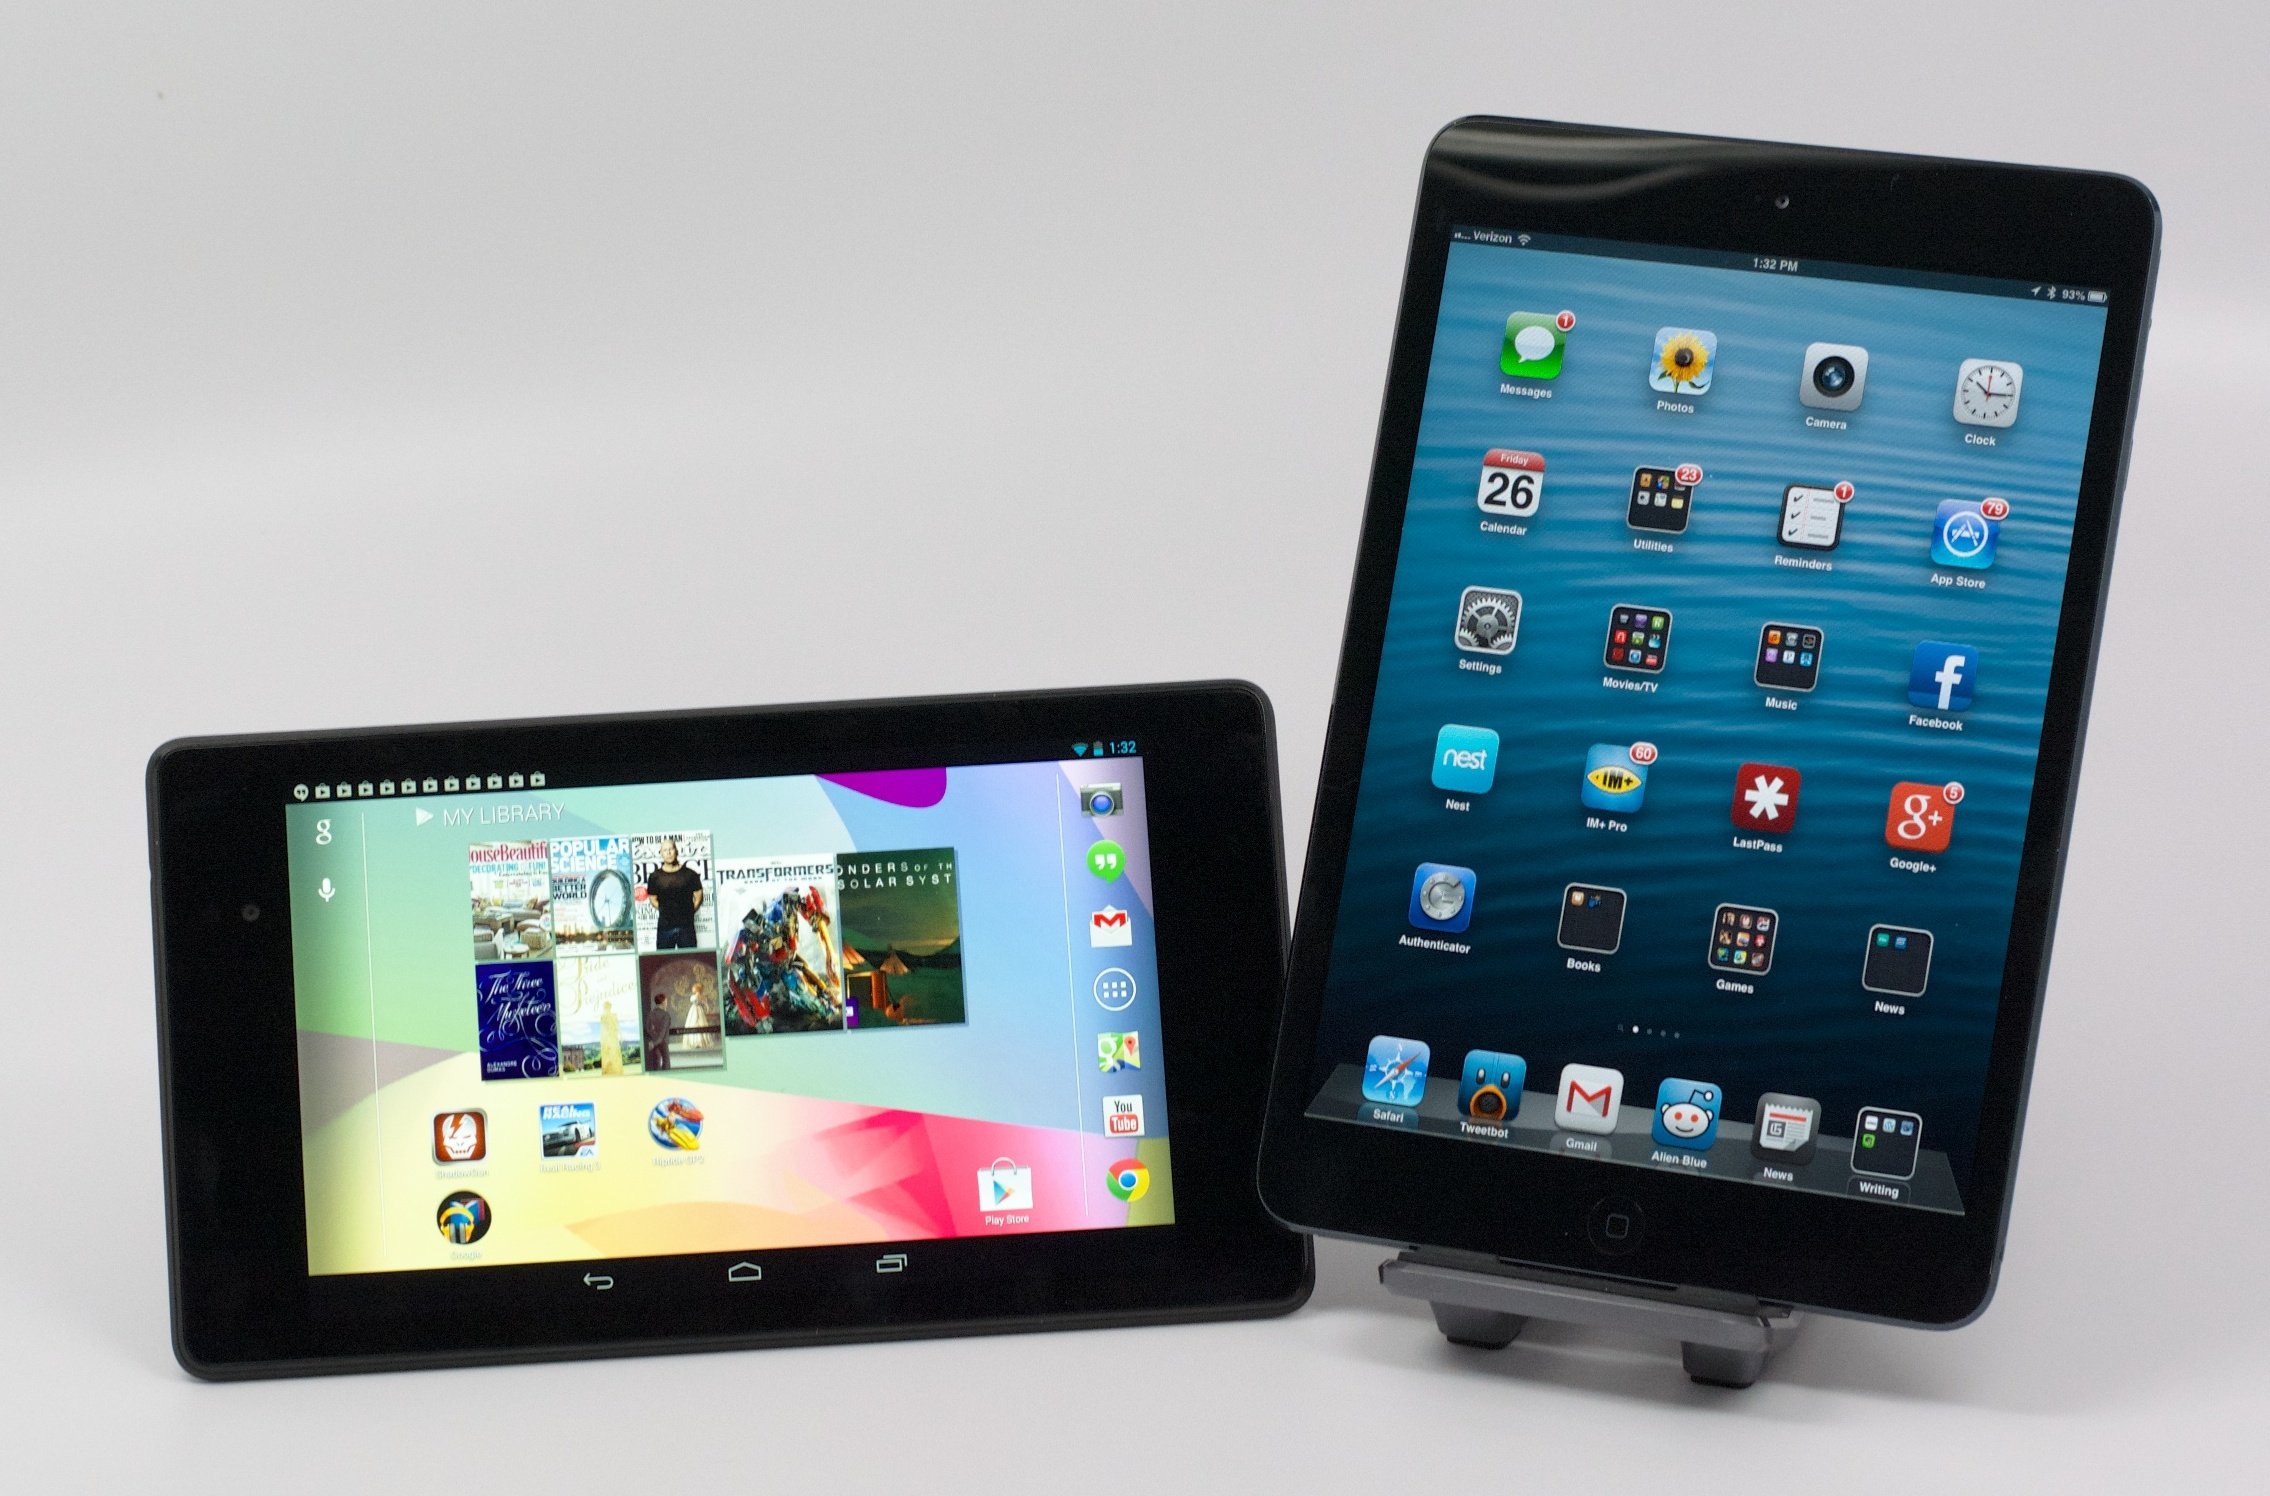 The iPad mini 2 with Retina Display could better compete with the new Nexus 7's high-resolution display.